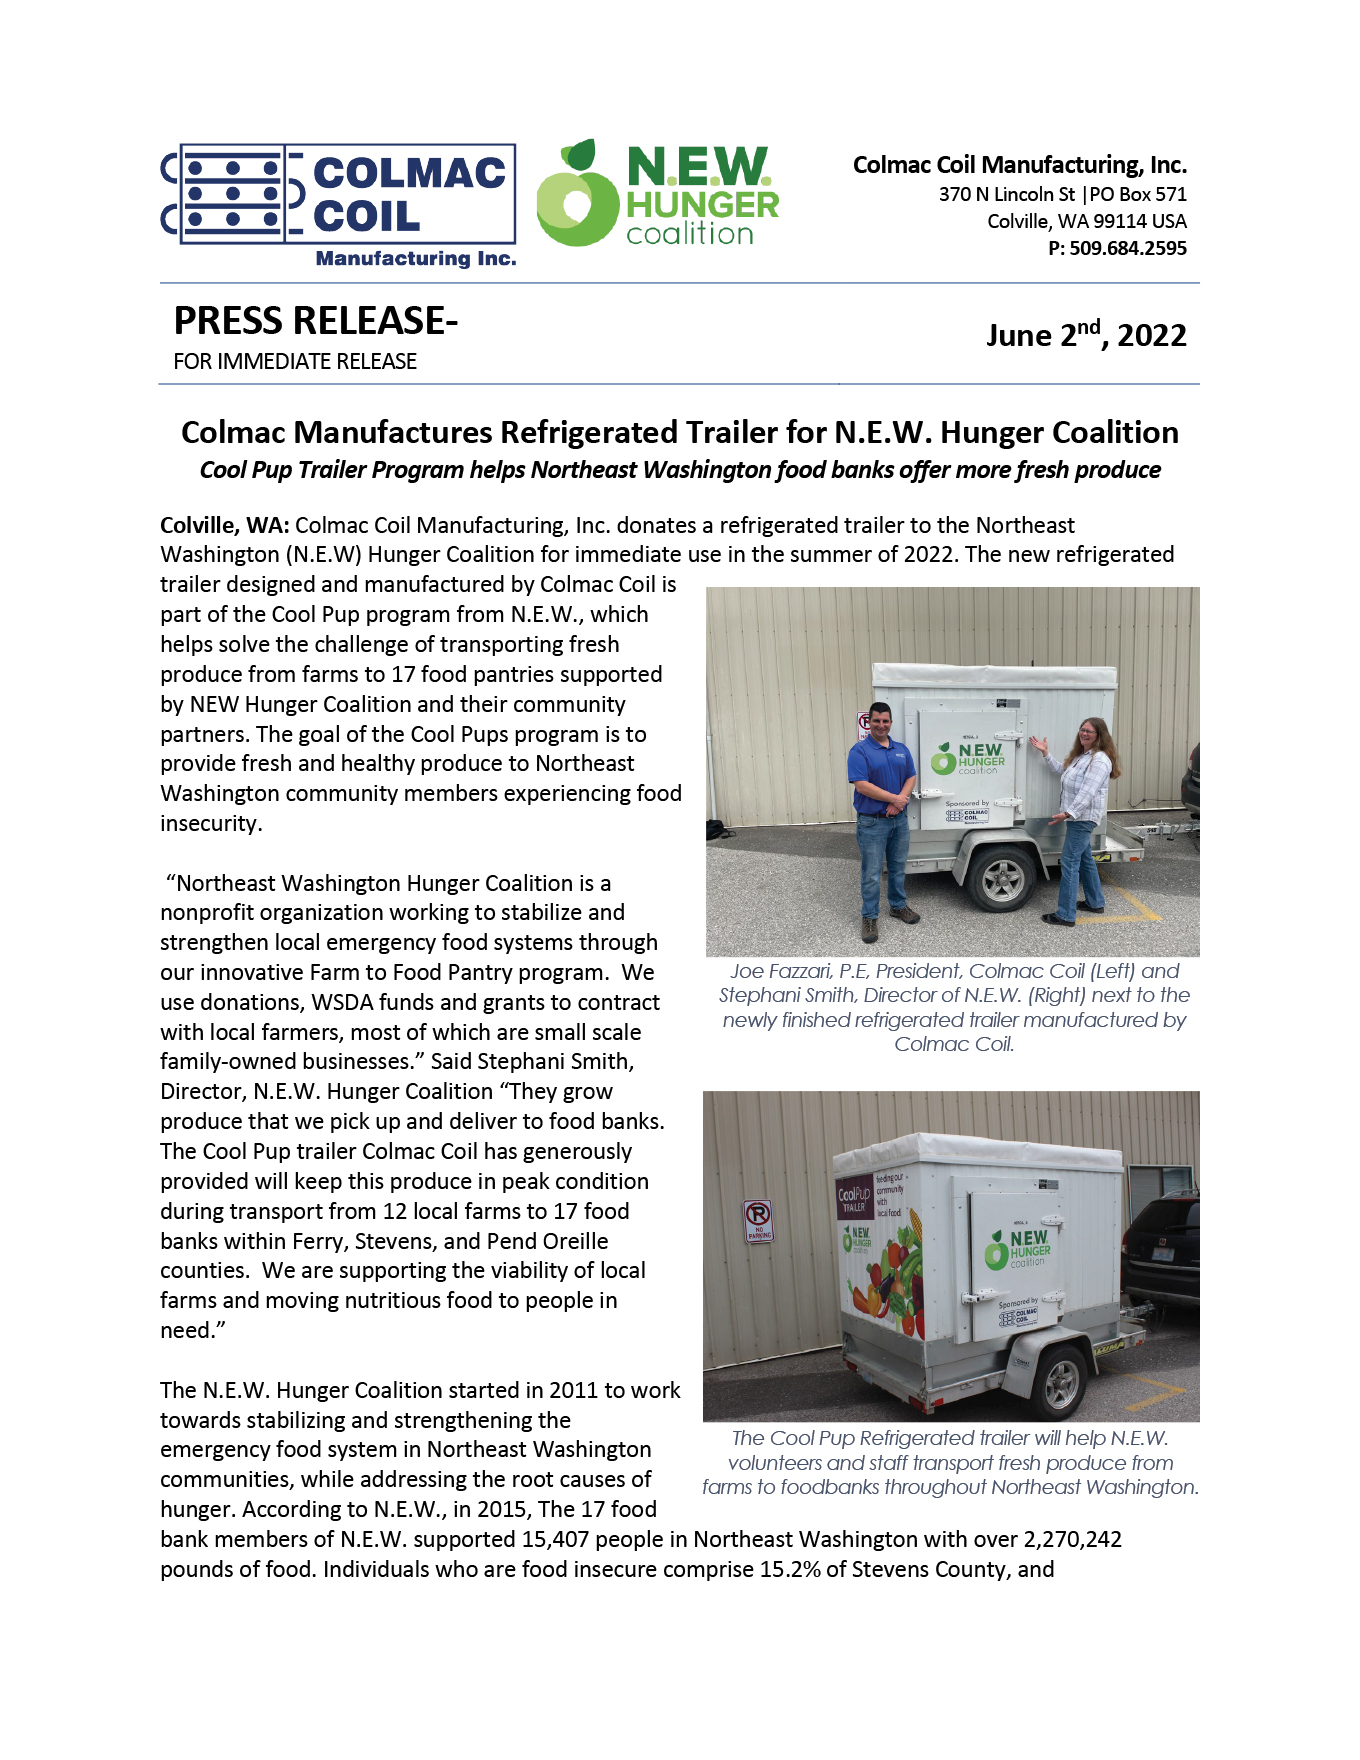 Colmac Coil Manufacturers Refrigerated Trailer For New Hunger Coalition Icon